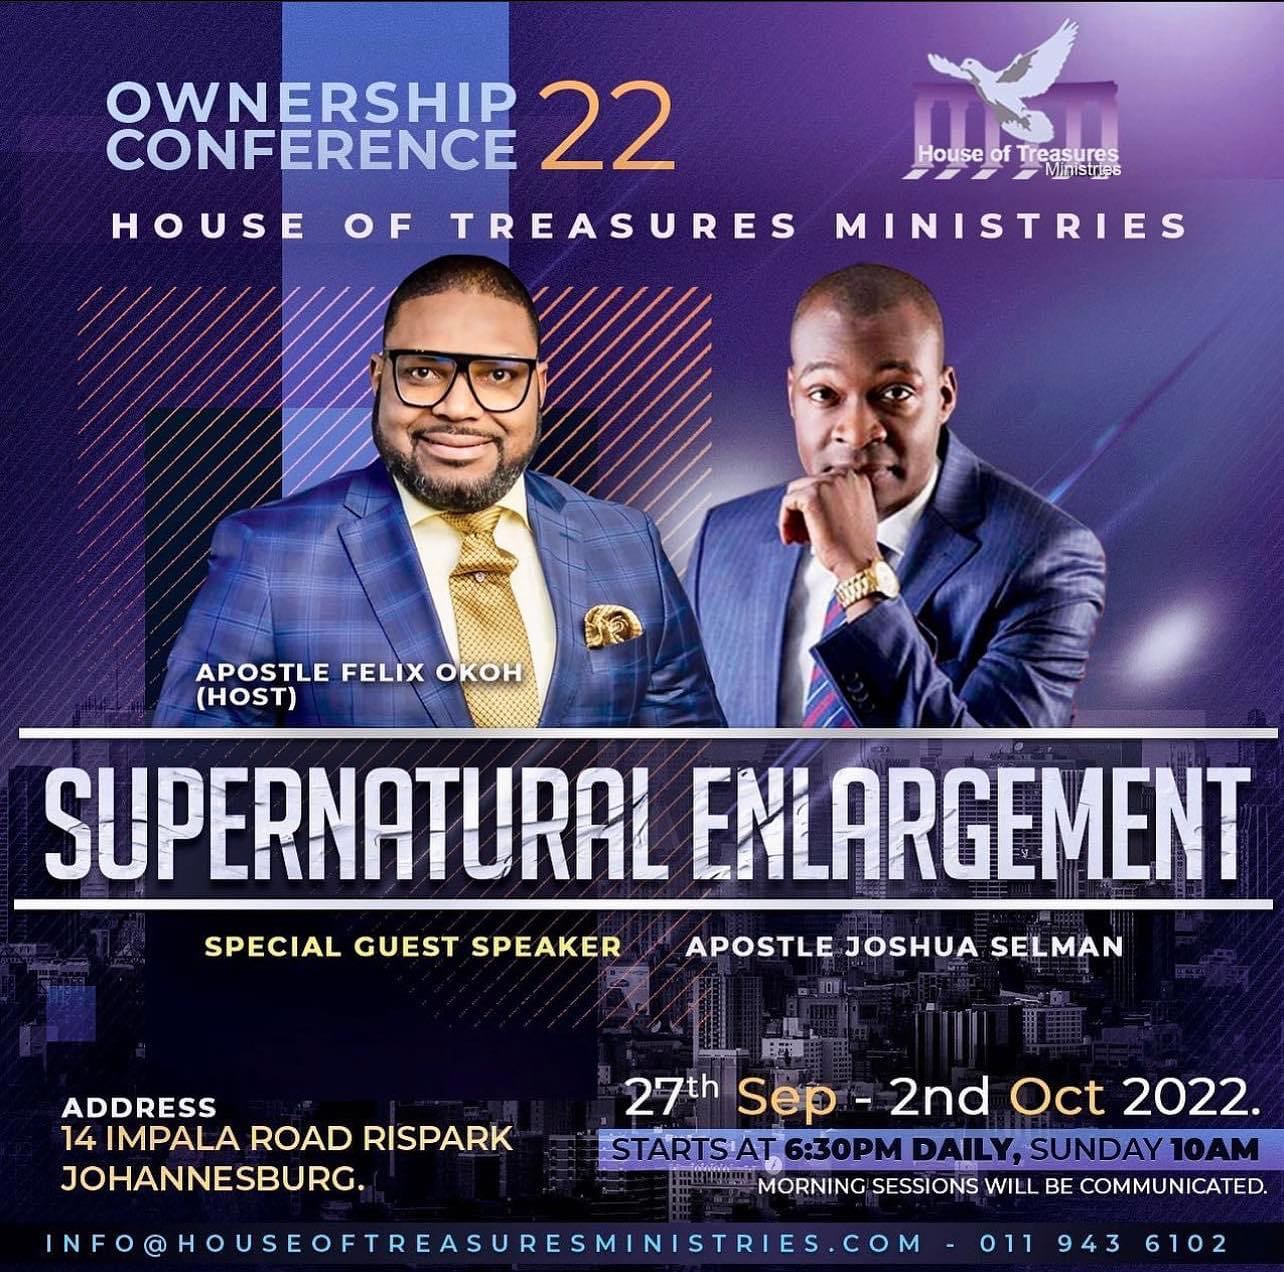 [MP3 DOWNLOAD] Miracle Service – Ownership Conference 2022 – Apostle Joshua Selman